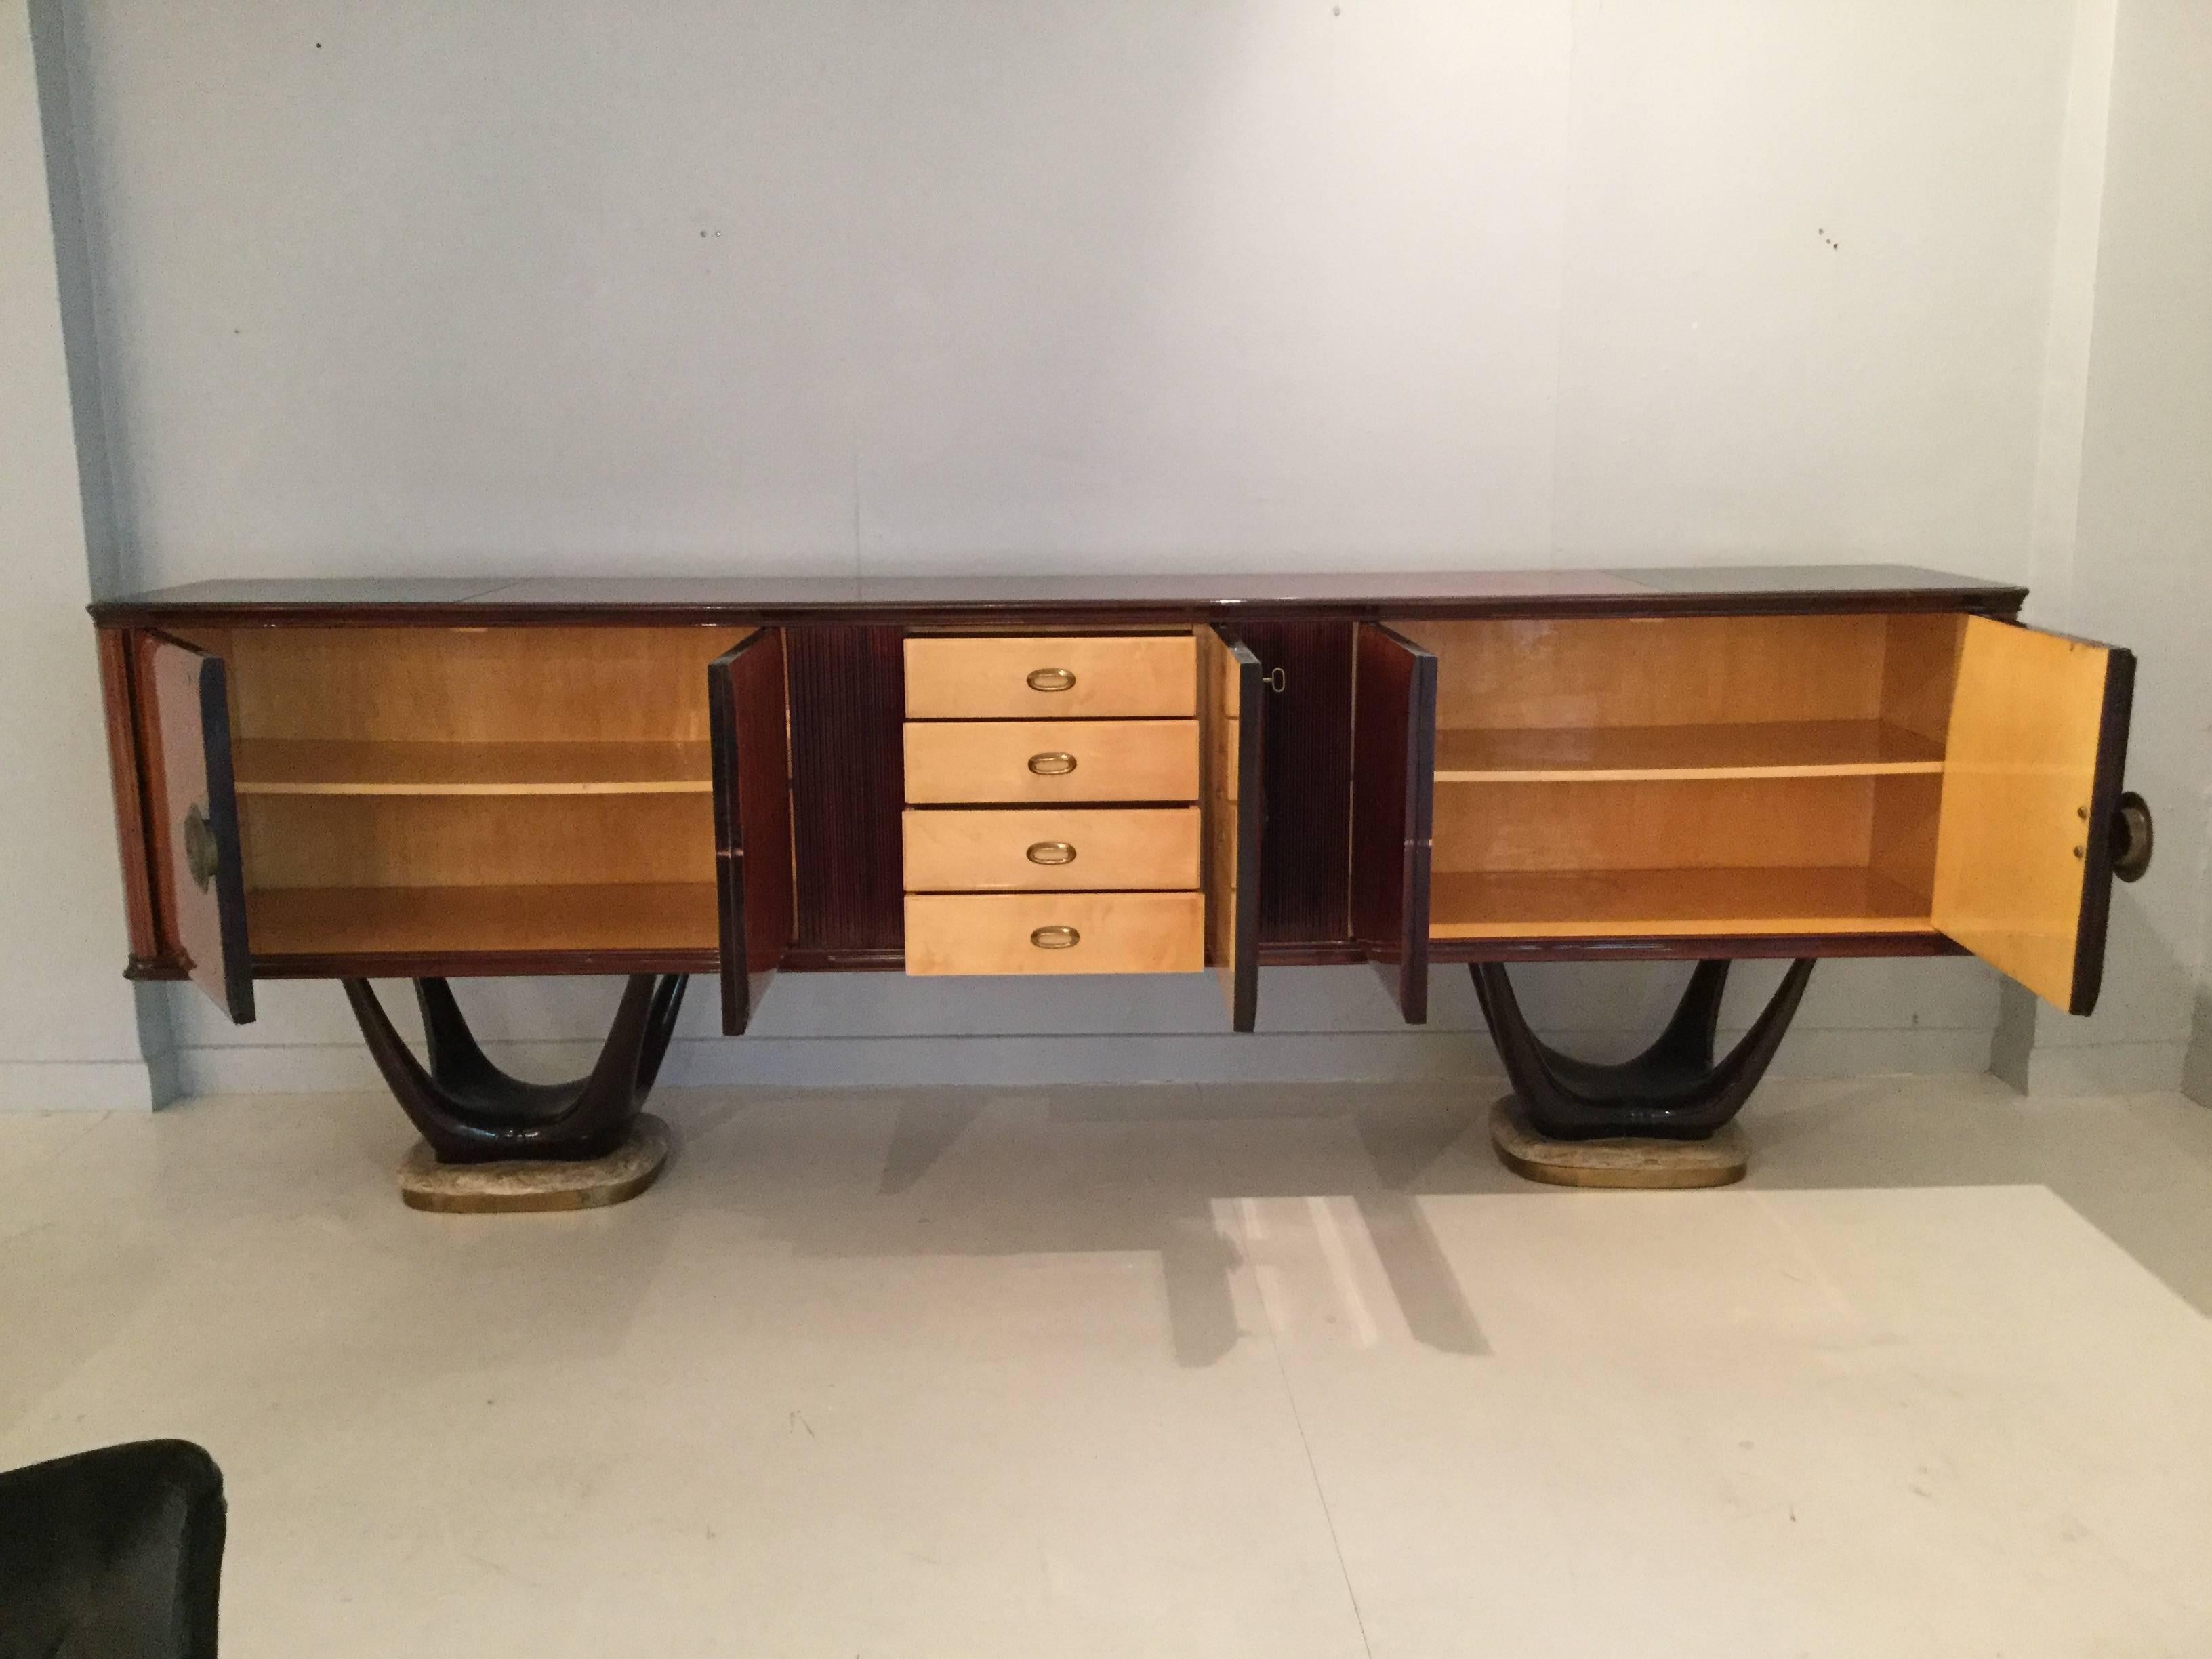 Stunning sideboard in walnut veneer with marble base and glass top with three doors: The central door hides four drawers; the side ones have wooden shelves.
In good vintage condition